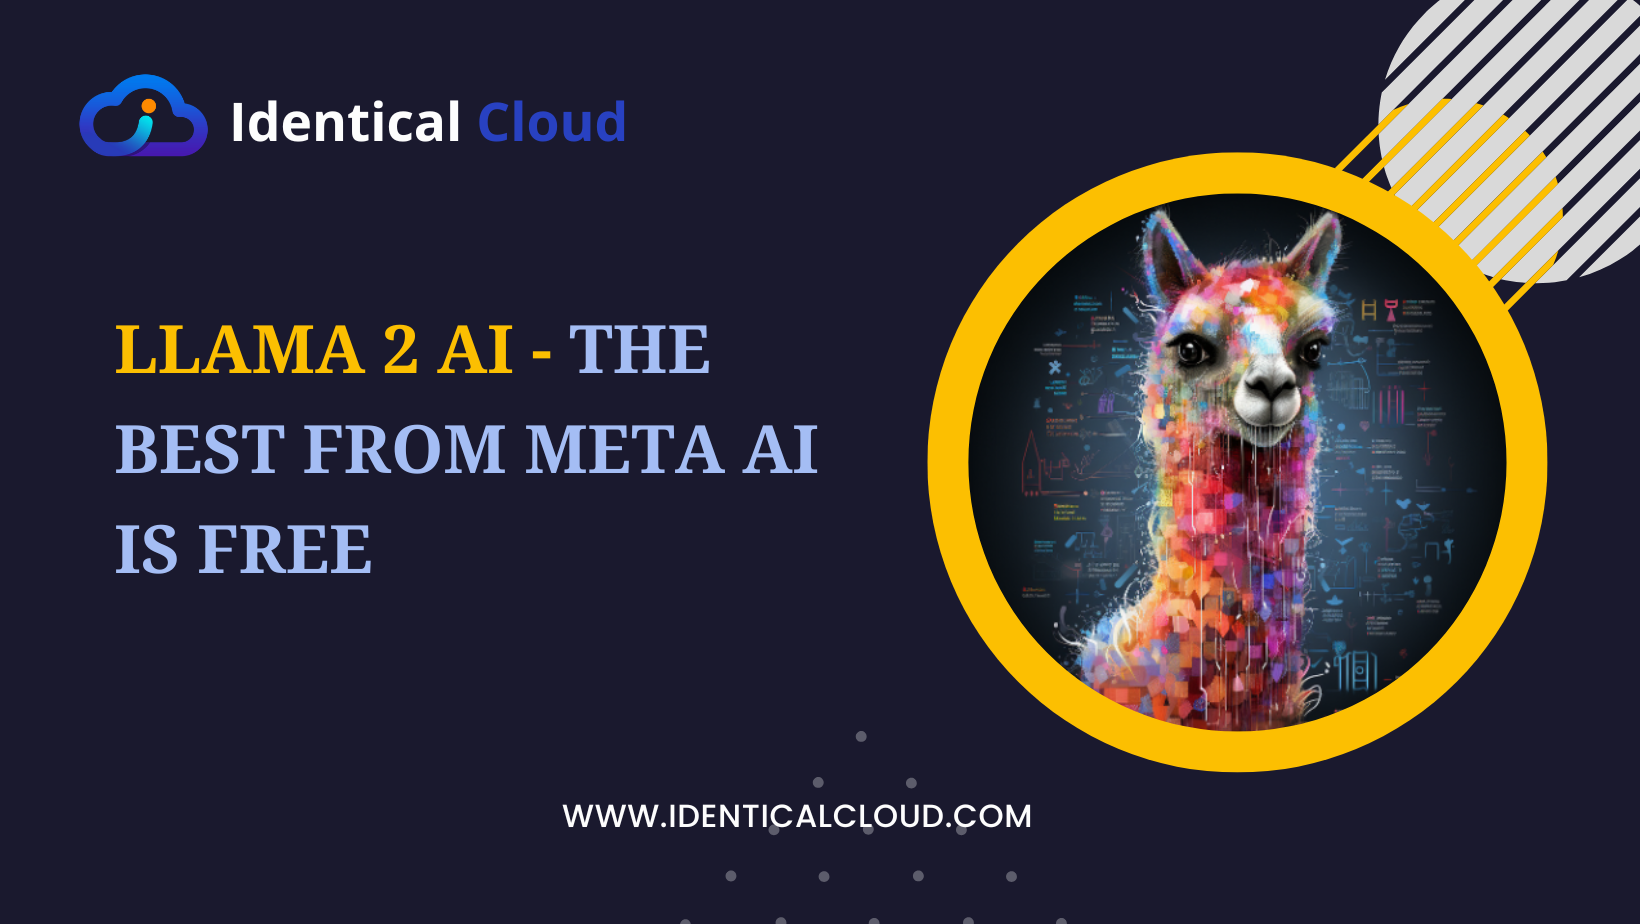 Llama 2 AI - The Best from Meta AI is free - identicalcloud.com